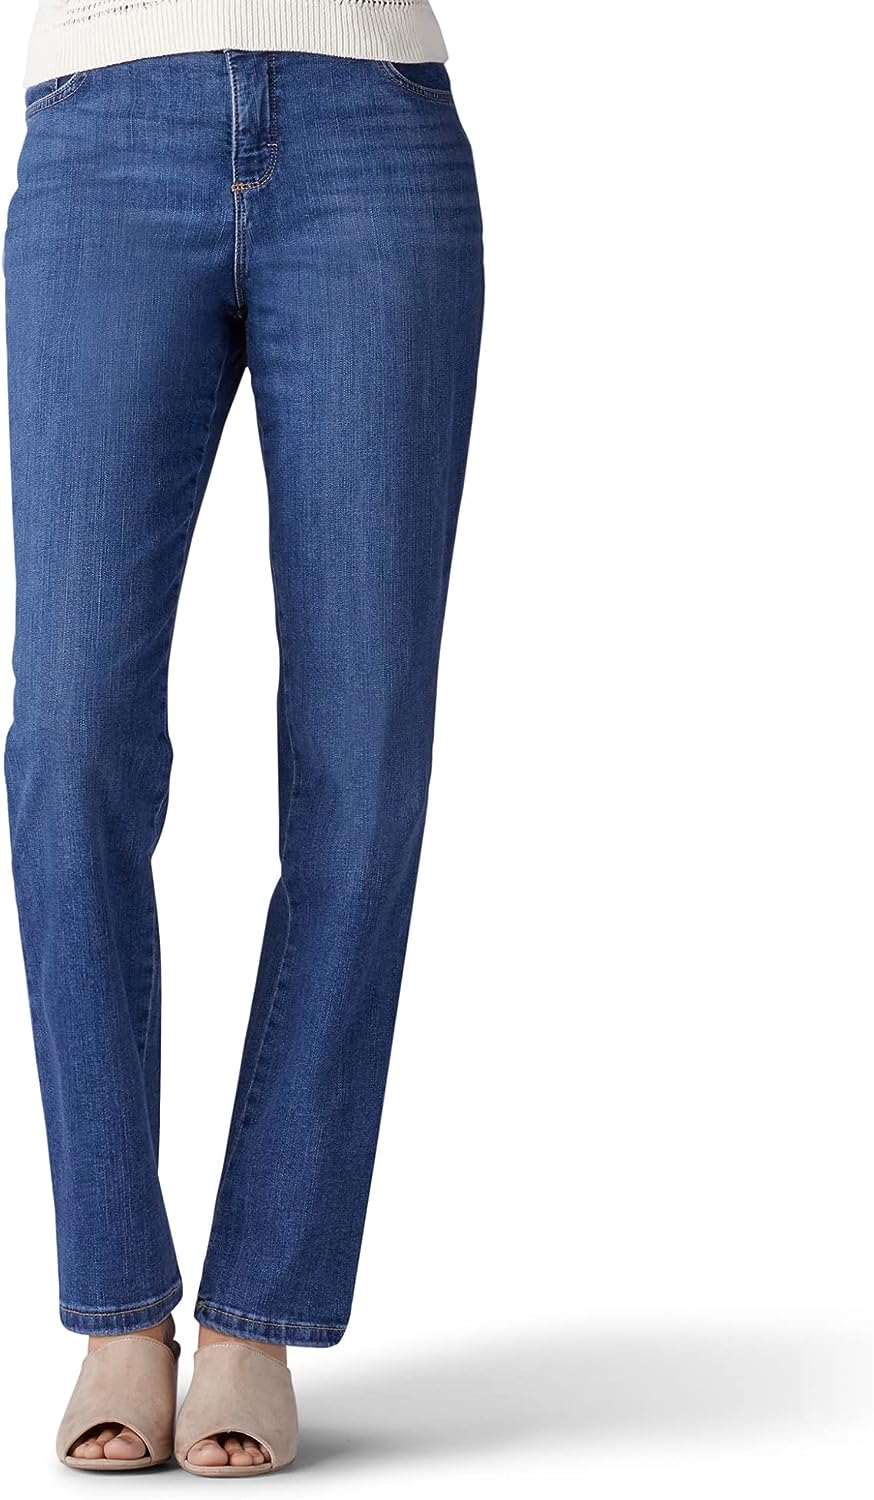 shoes for straight leg jeans detailed review